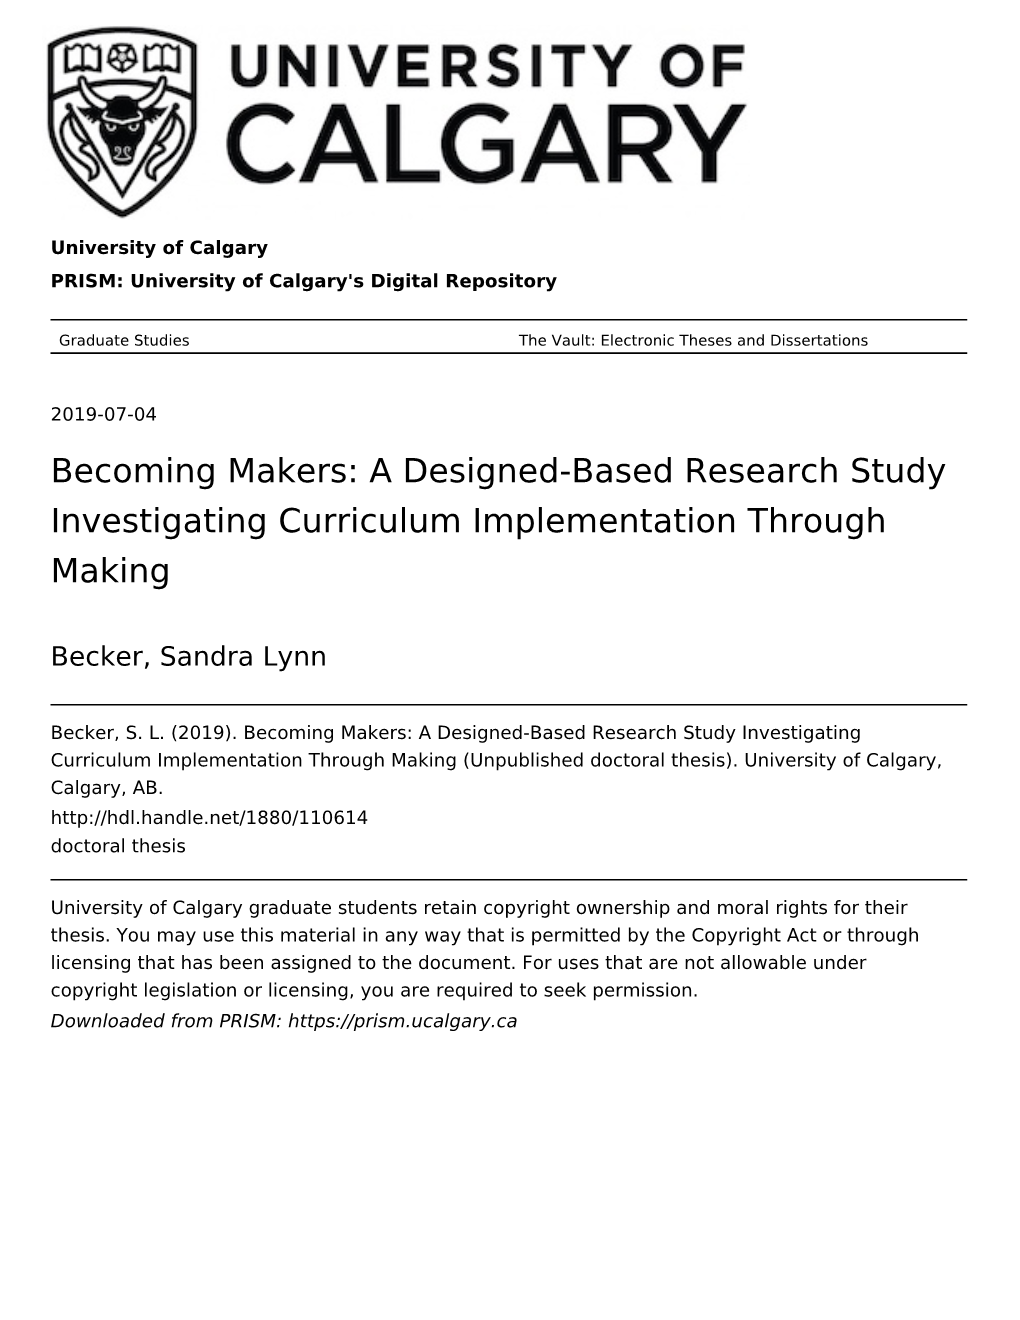 Becoming Makers: a Designed-Based Research Study Investigating Curriculum Implementation Through Making